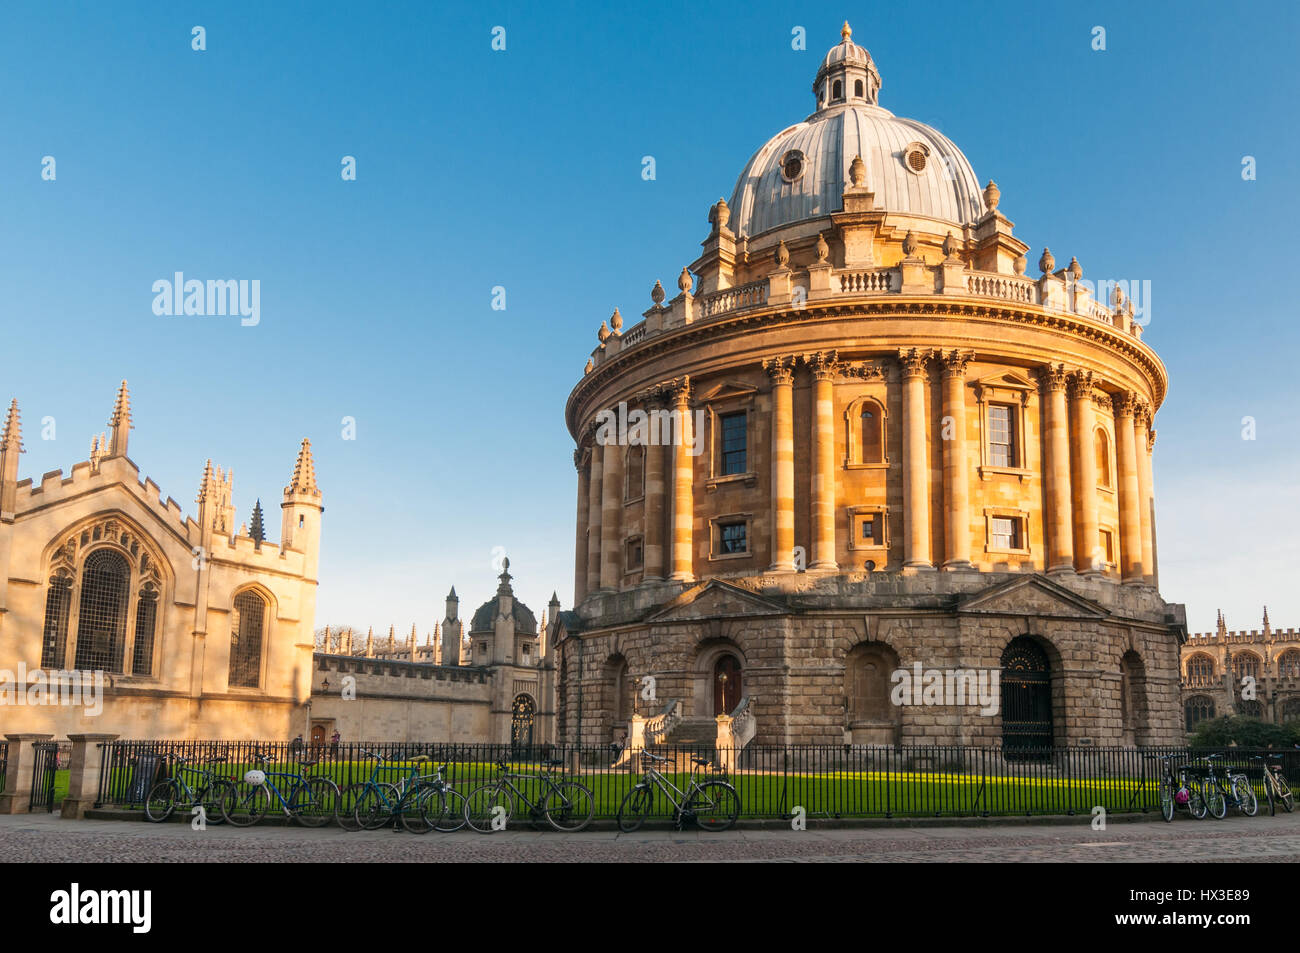 Sunset view of Radcliffe Camera, Oxford, England Stock Photo